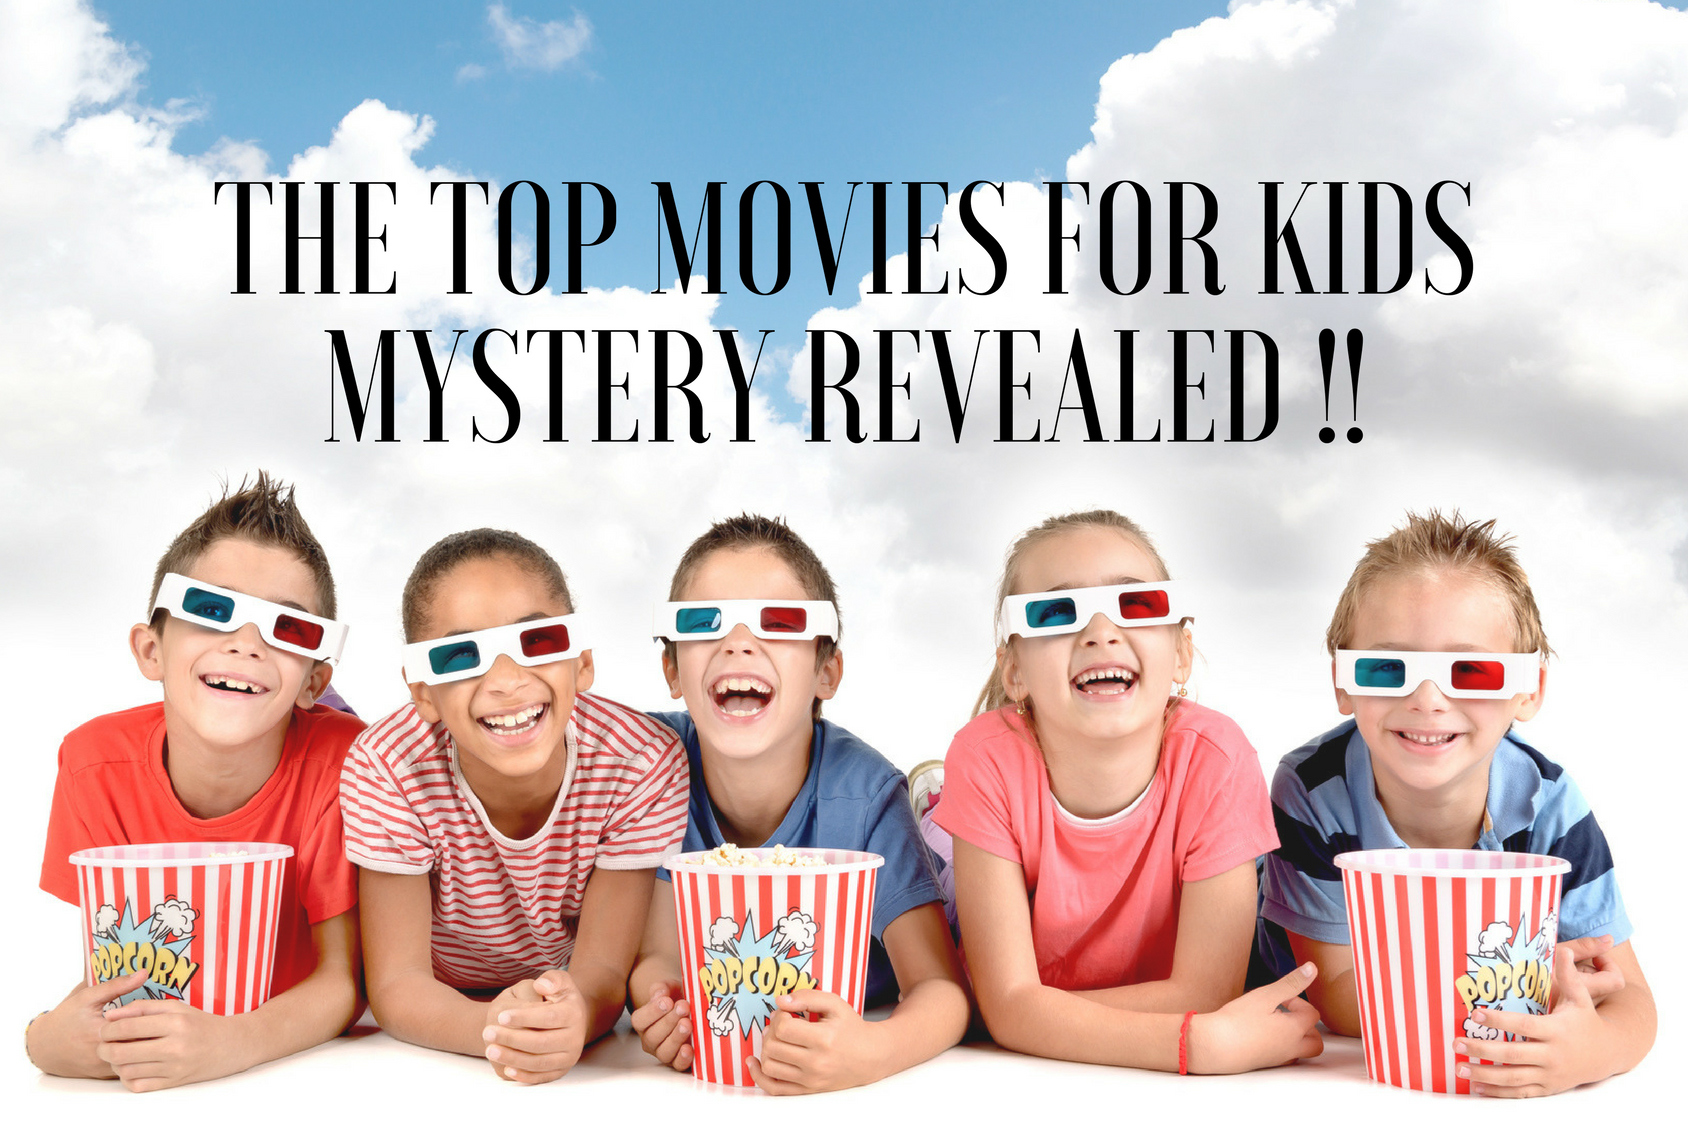 Top Movies for Kids Made Simple - Your Kids Would Love You for This!!